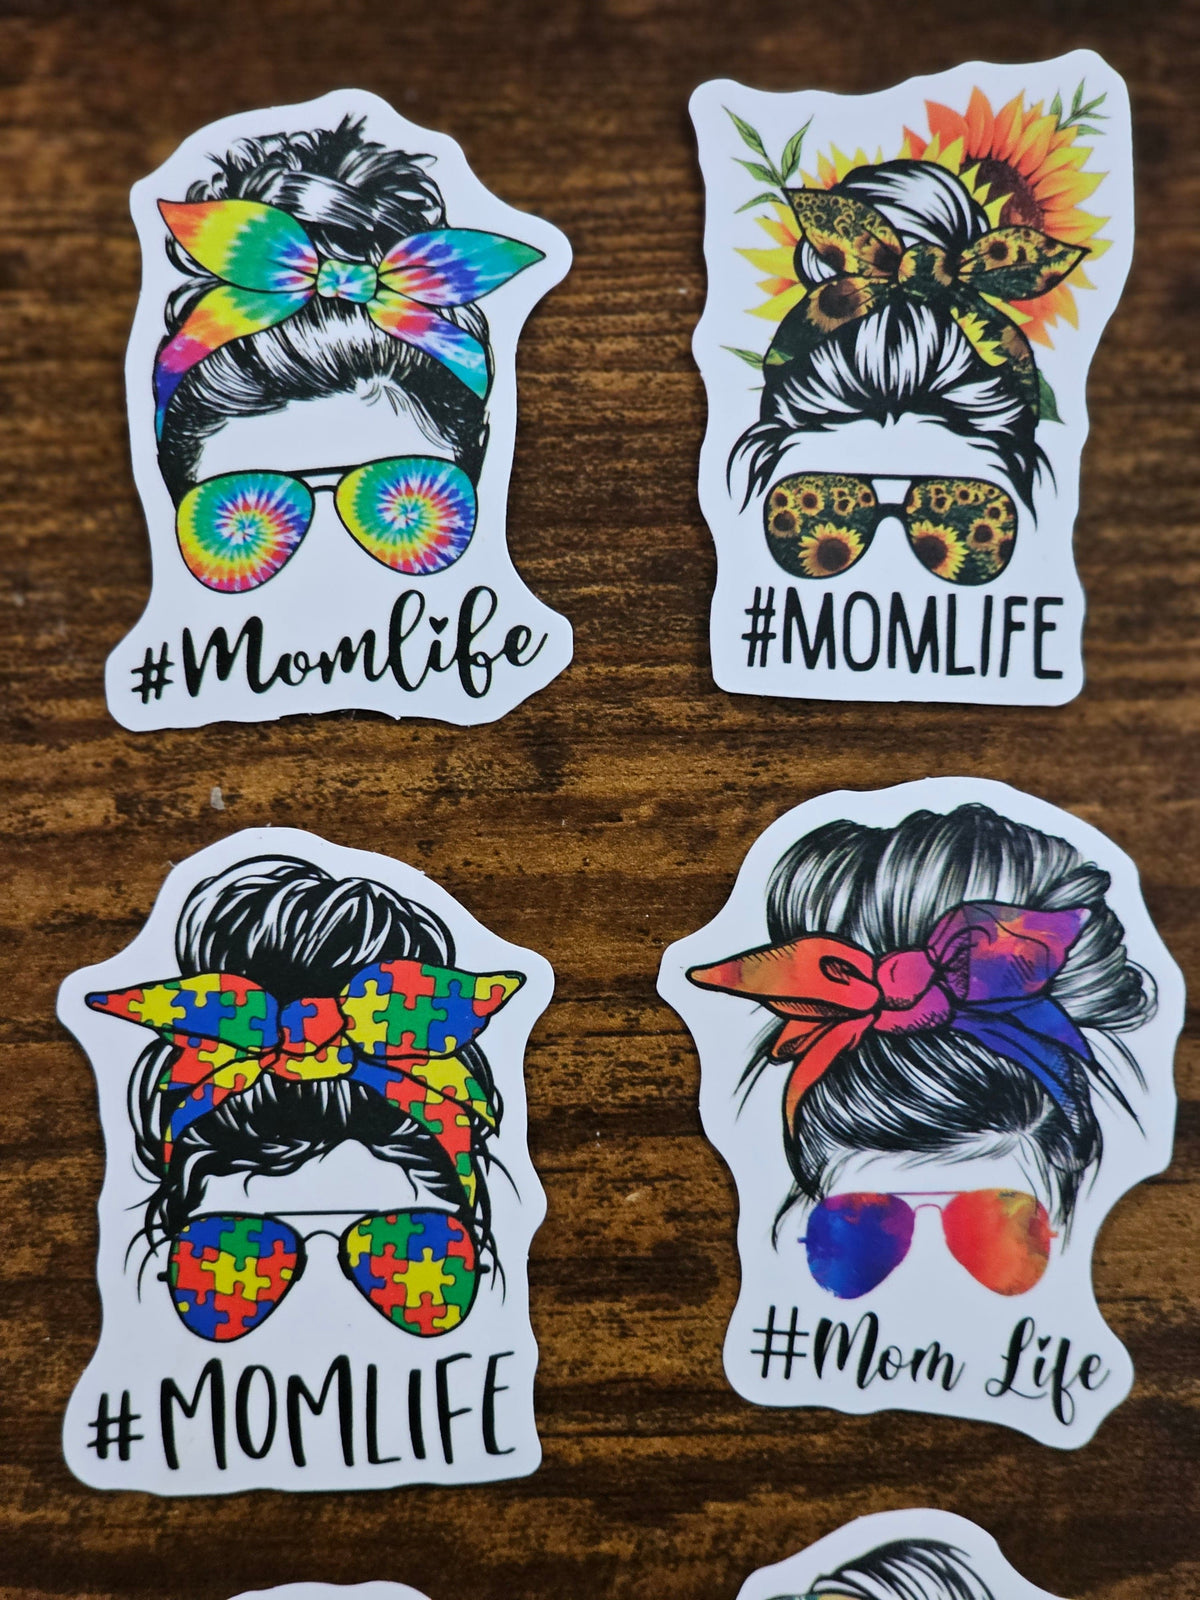 Get Creative with 50 Unique MOM Life Stickers - Perfect for DIY Crafts and Personalized Gifts!